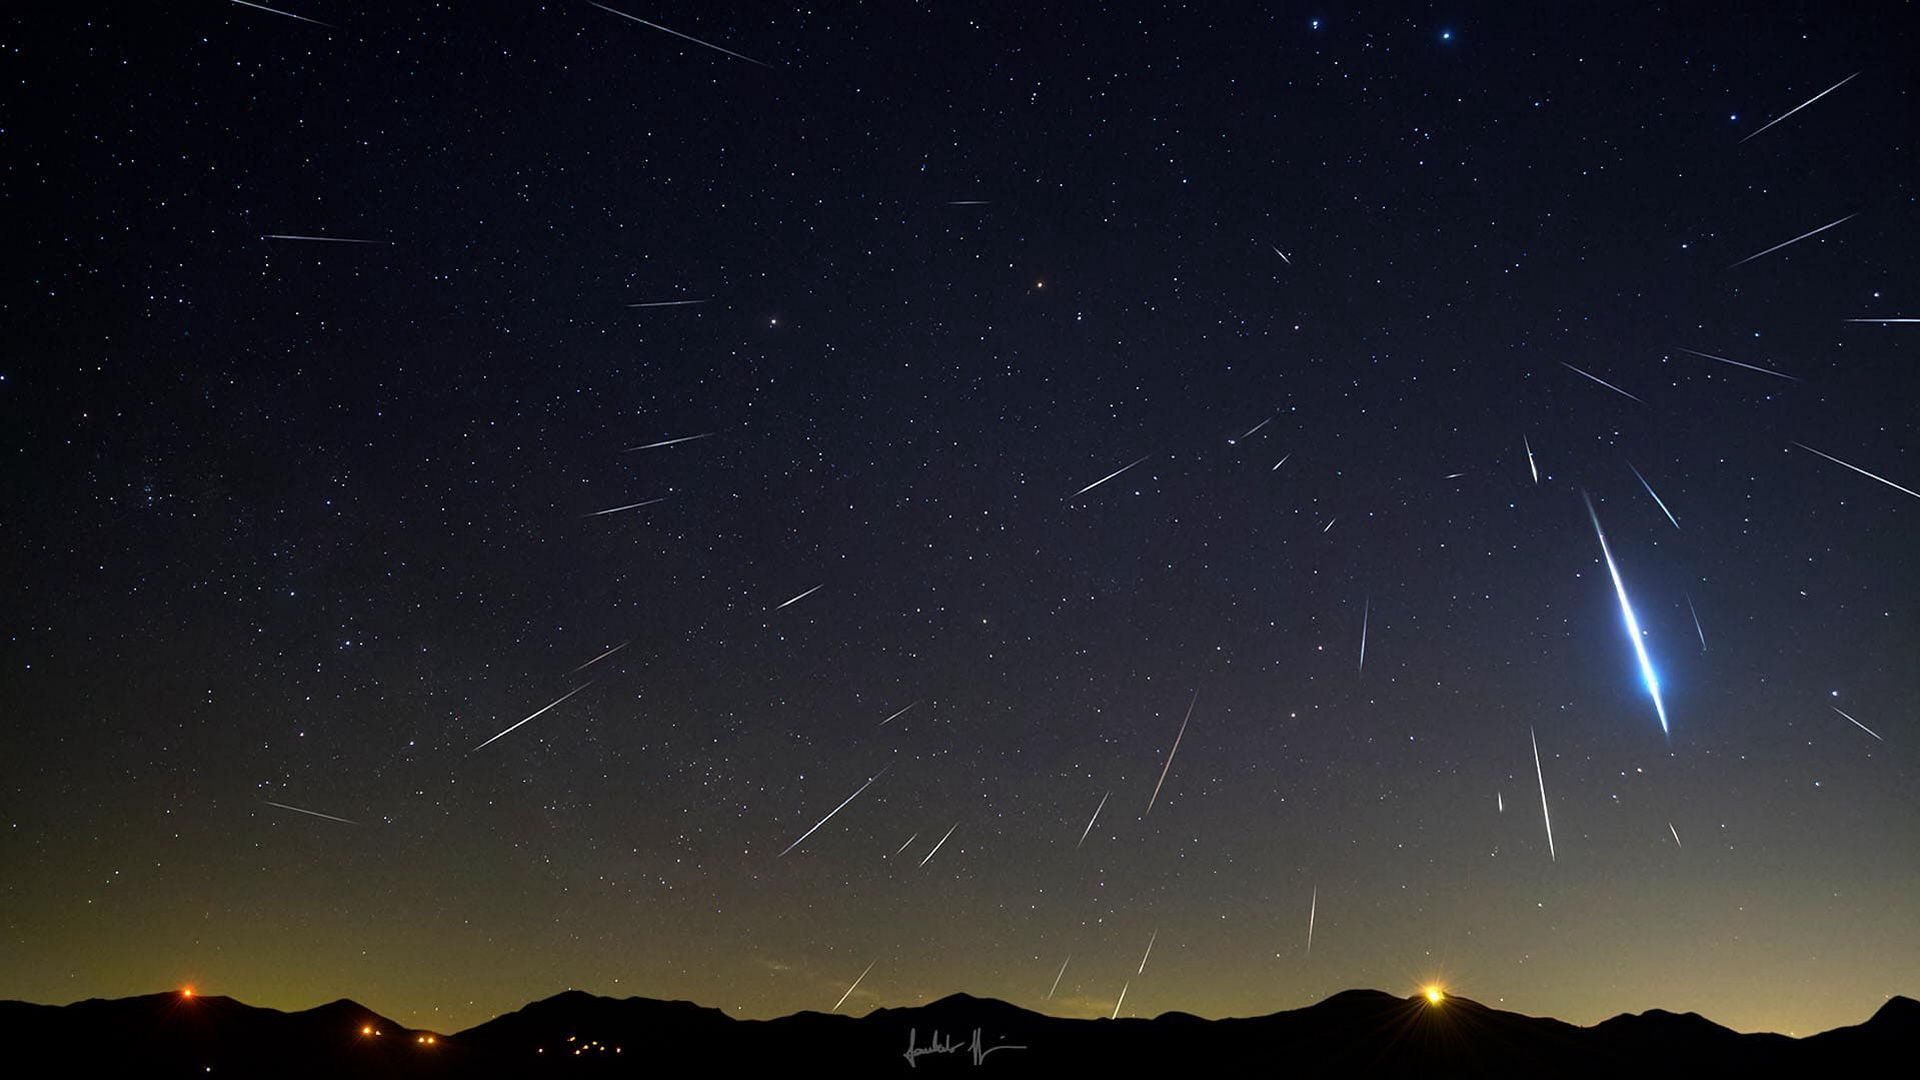 The Quadrantids: The First of Three Major Meteor Showers of 2021